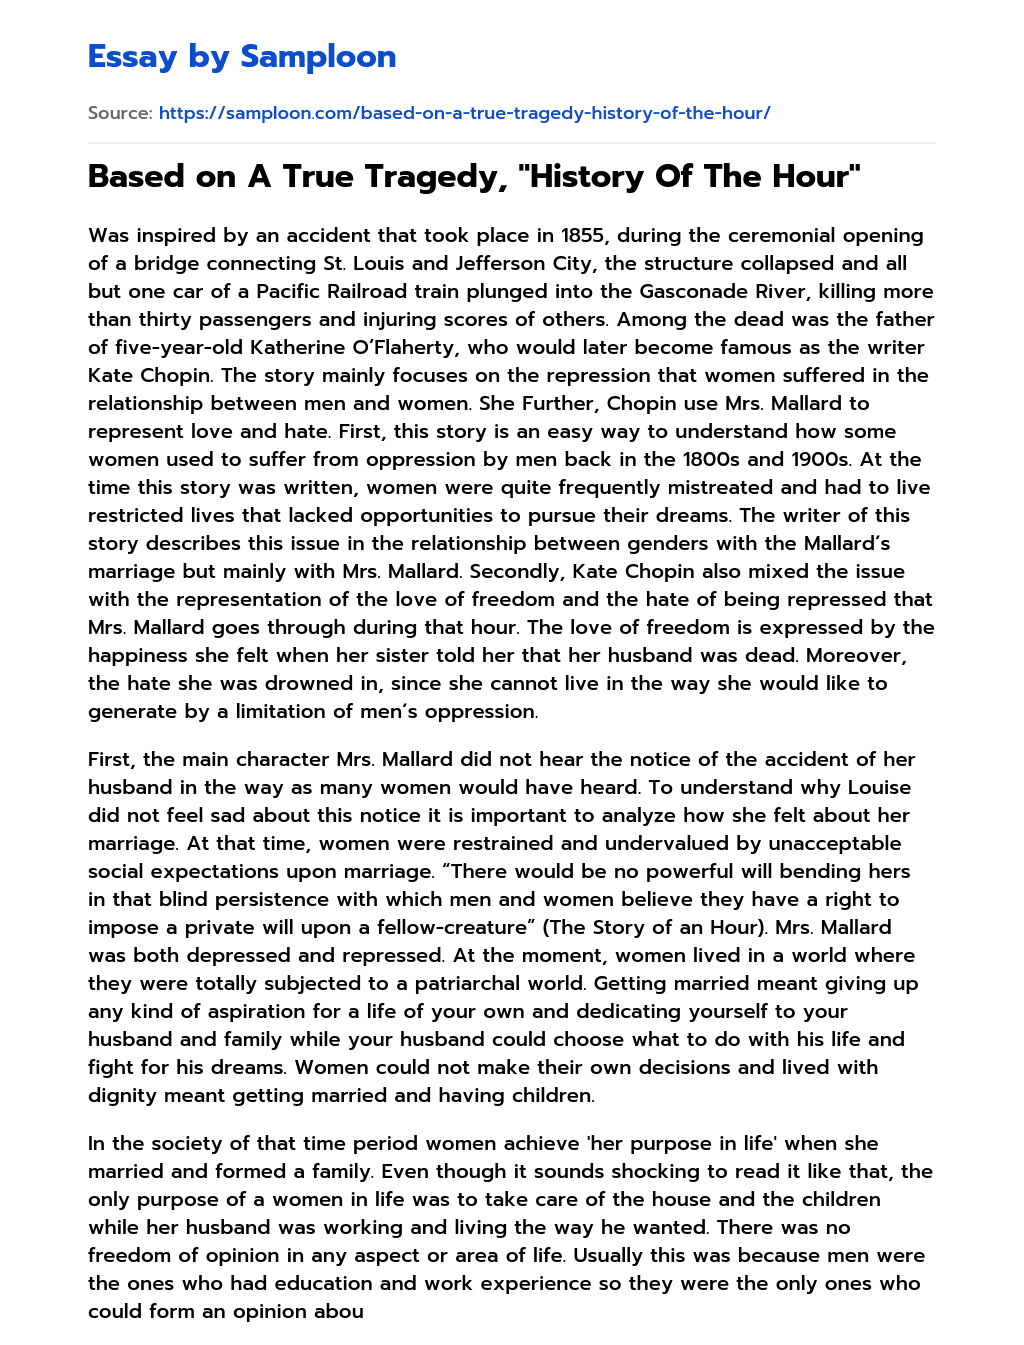 Based on A True Tragedy, “History Of The Hour” essay